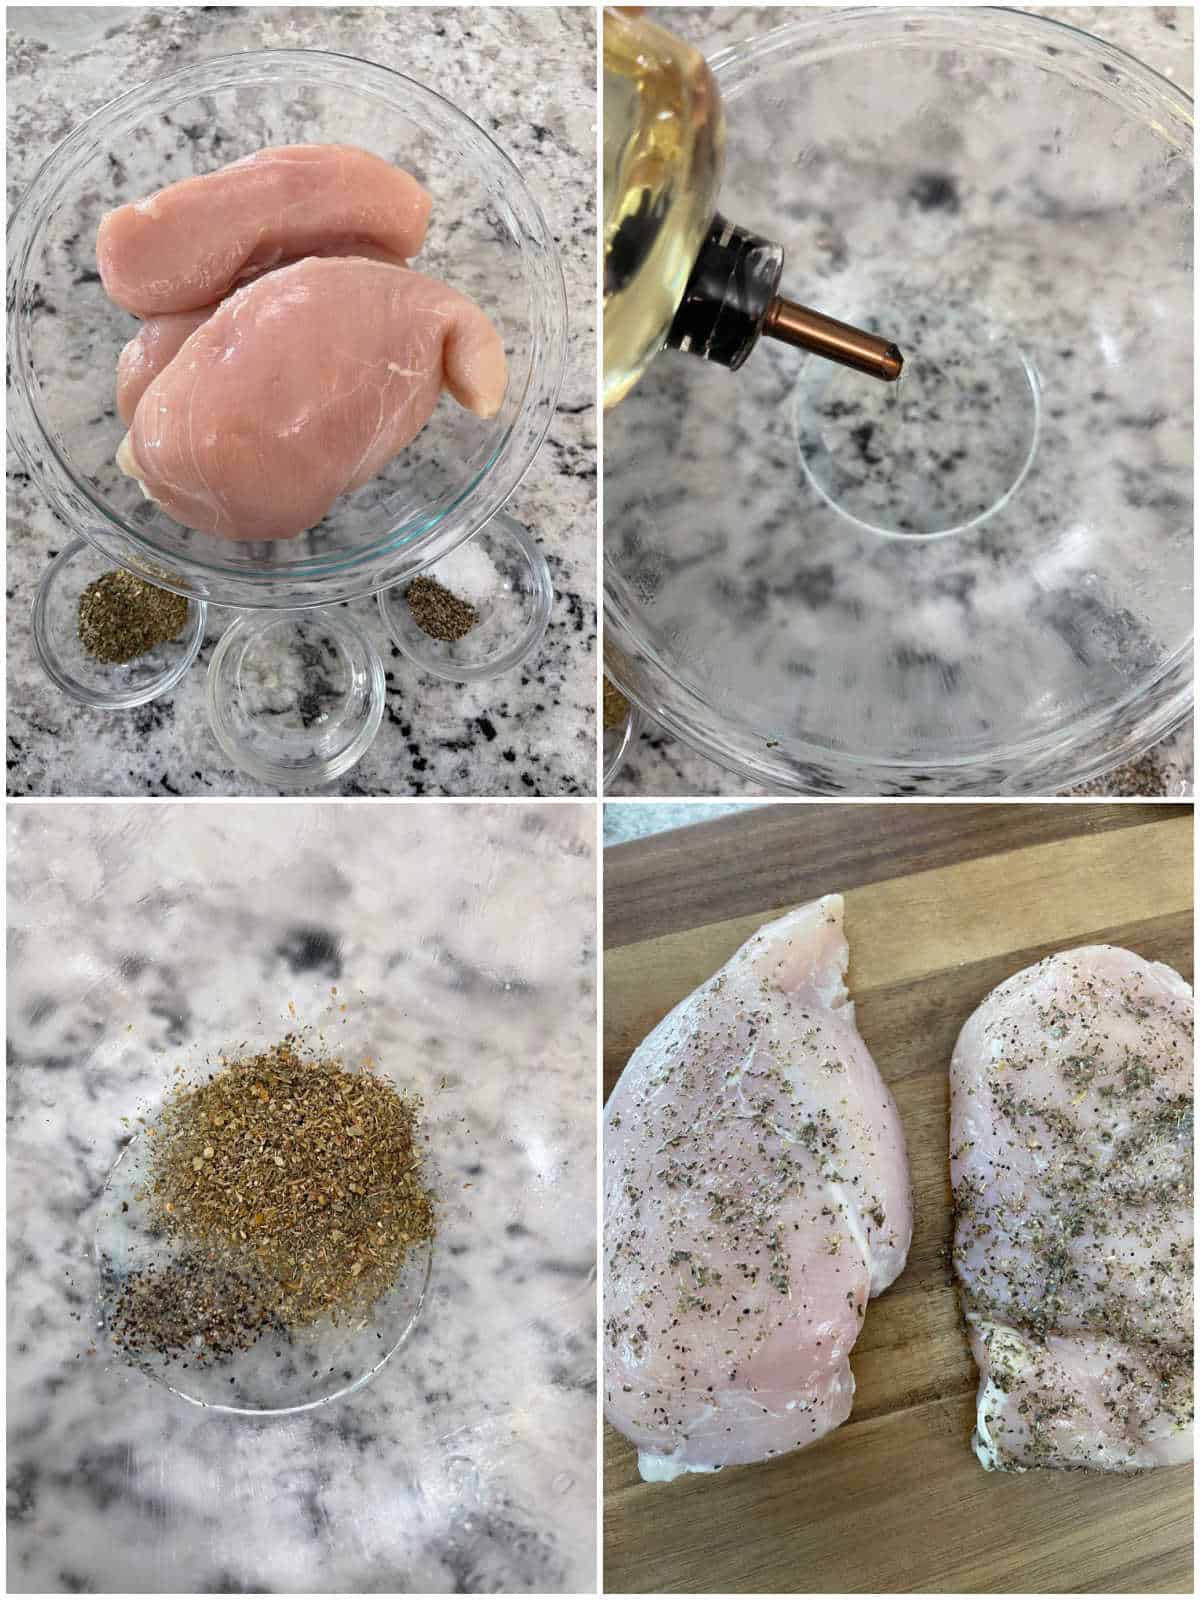 Step by steps images of preparing chicken breasts with an Italian seasoning olive oil rub.